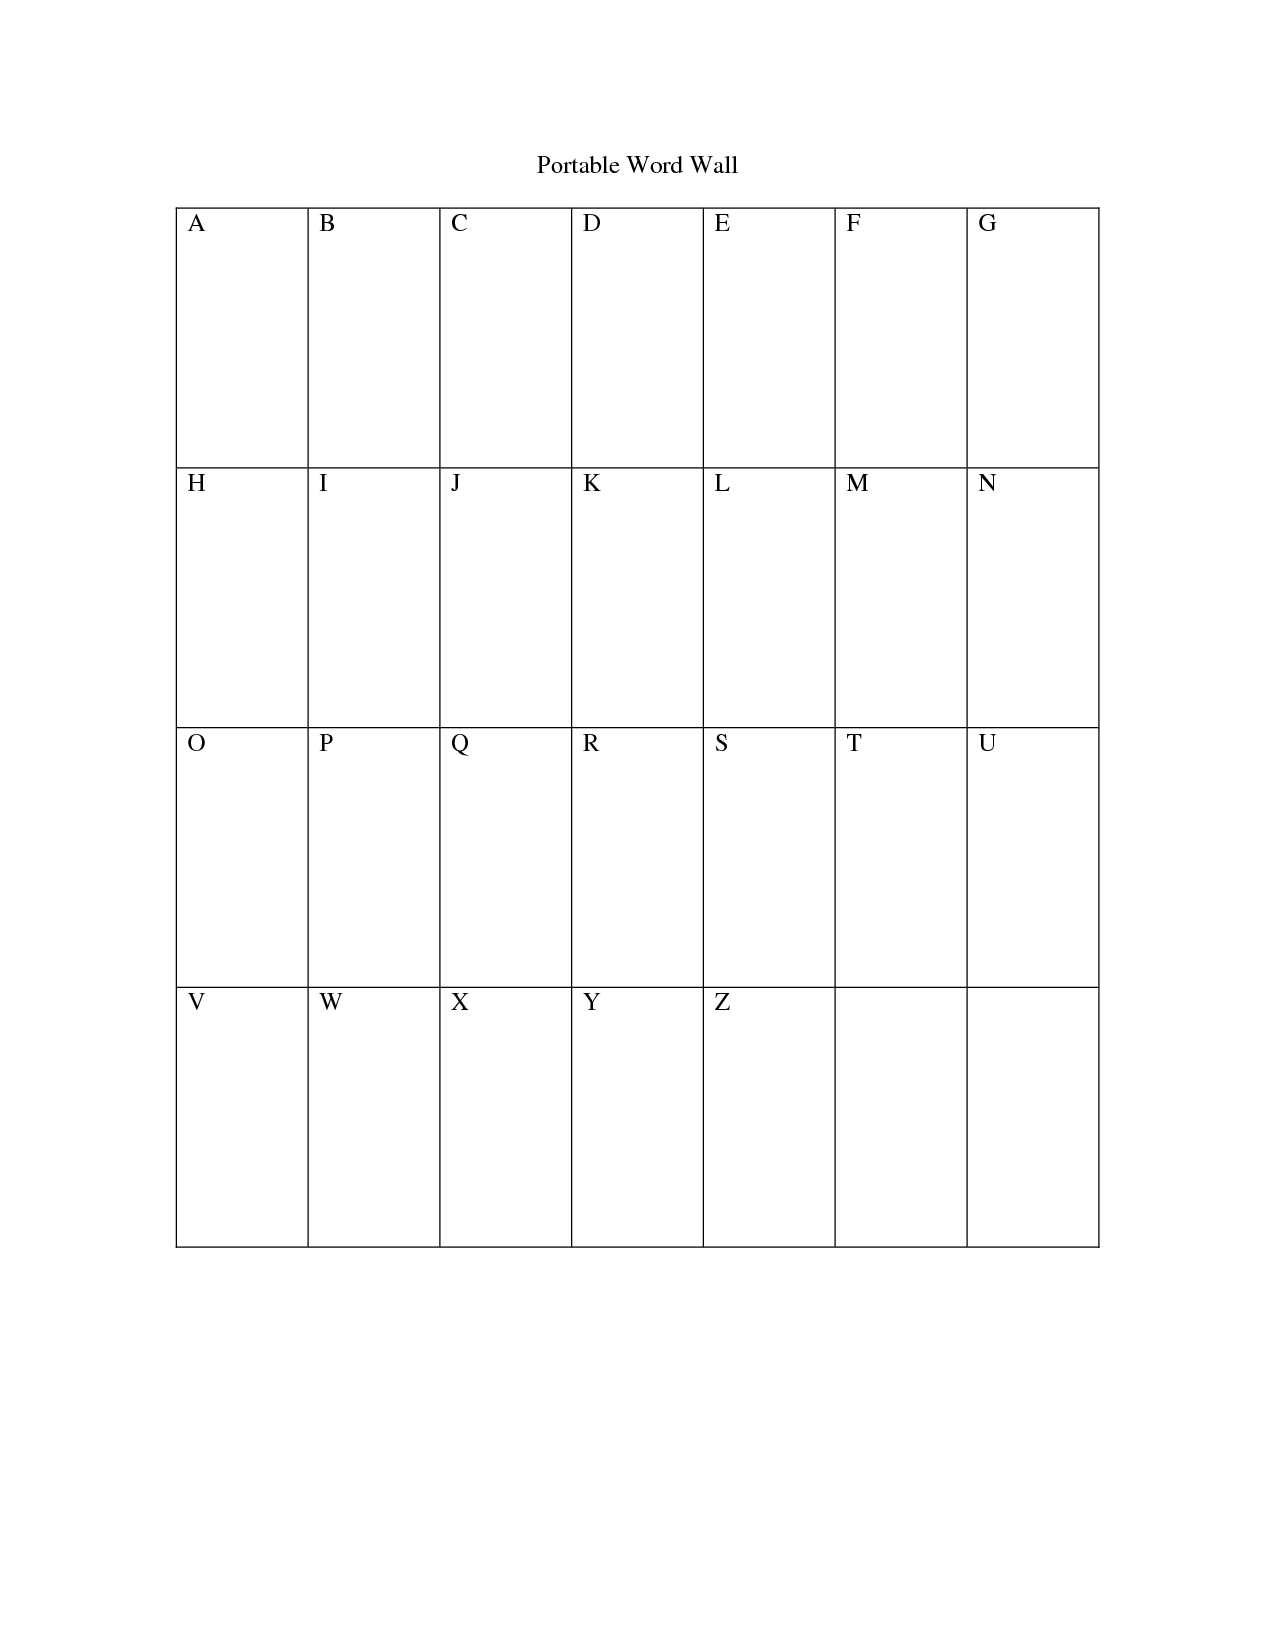 Printable Portable Word Wall Template – Gubel In Personal Word Wall Template